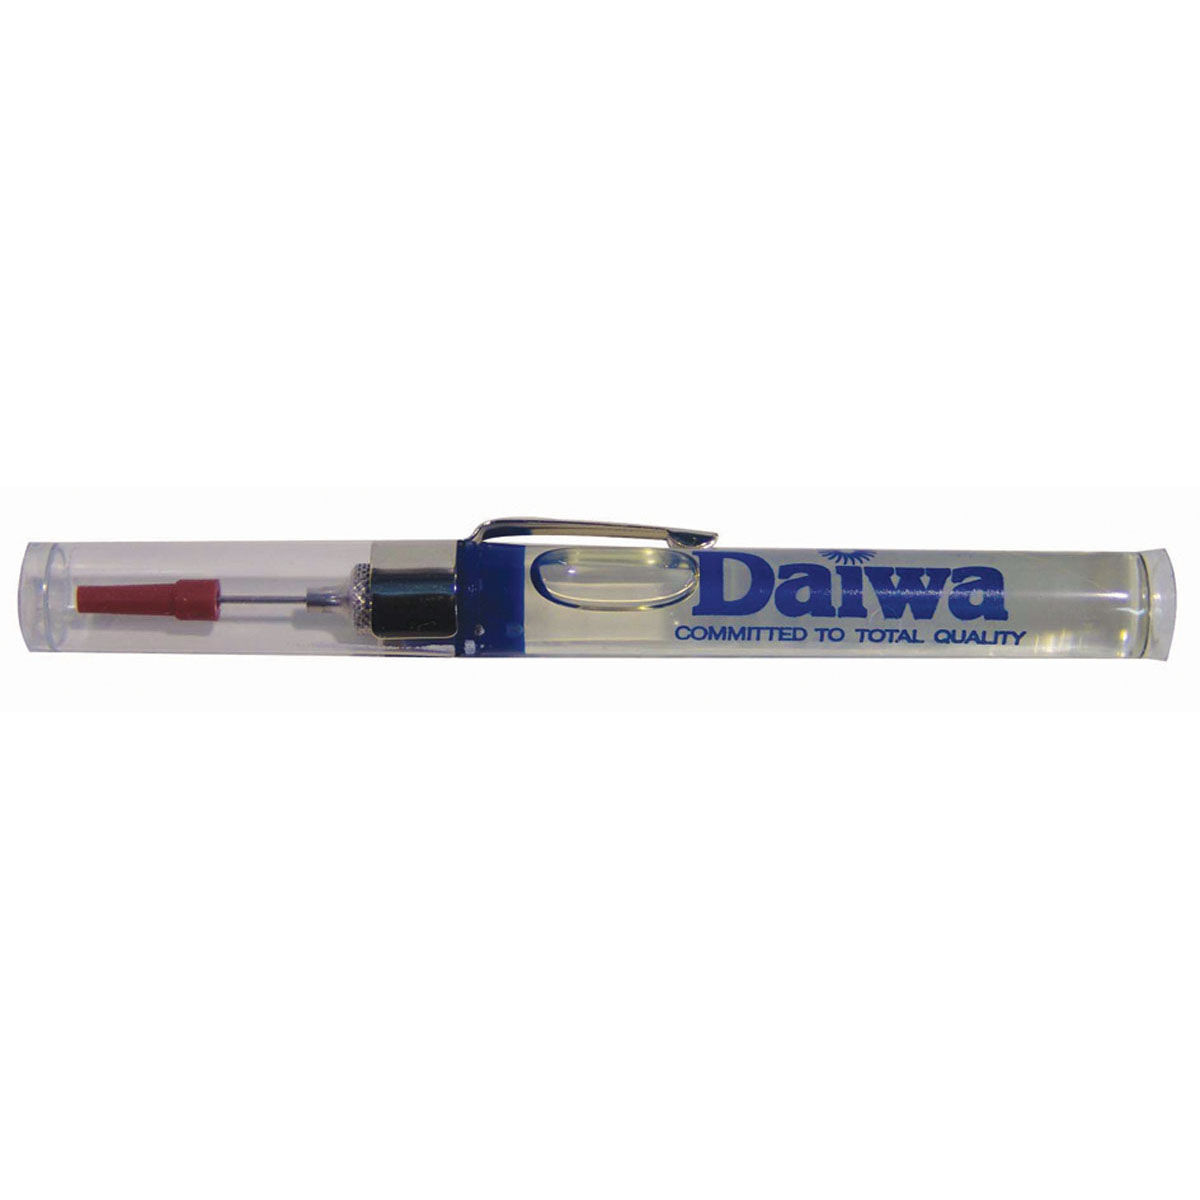 The 'DAIWA' Reel Maintenance Chemicals/Oils.:- a).Reel Lubricant